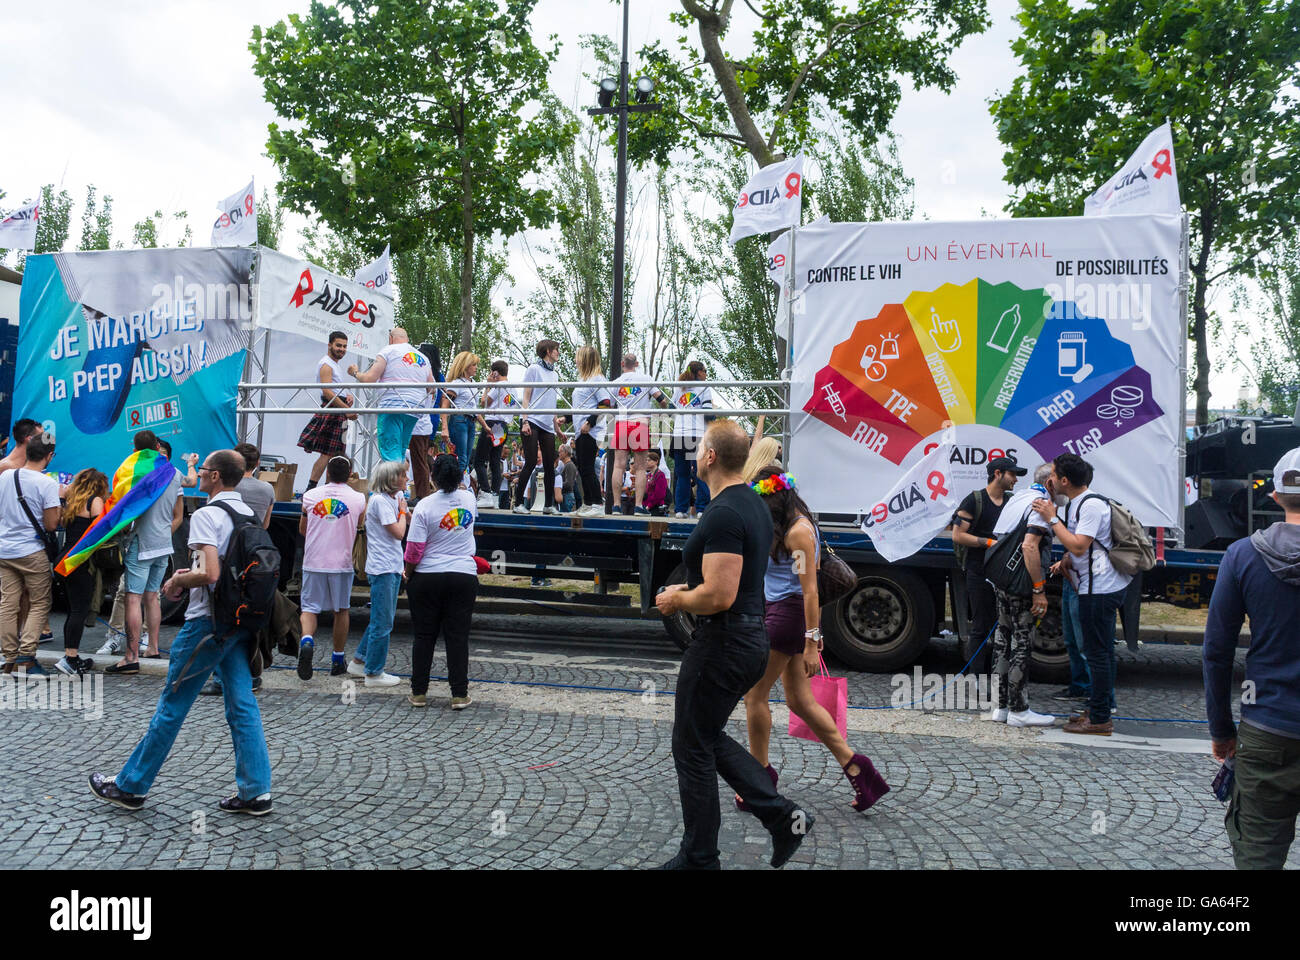 Paris, France, AIDES N.G.O. Truck with Sign at French Gay Pride, LGBT Activism, Street Scene, aids poster, Queer activism Stock Photo